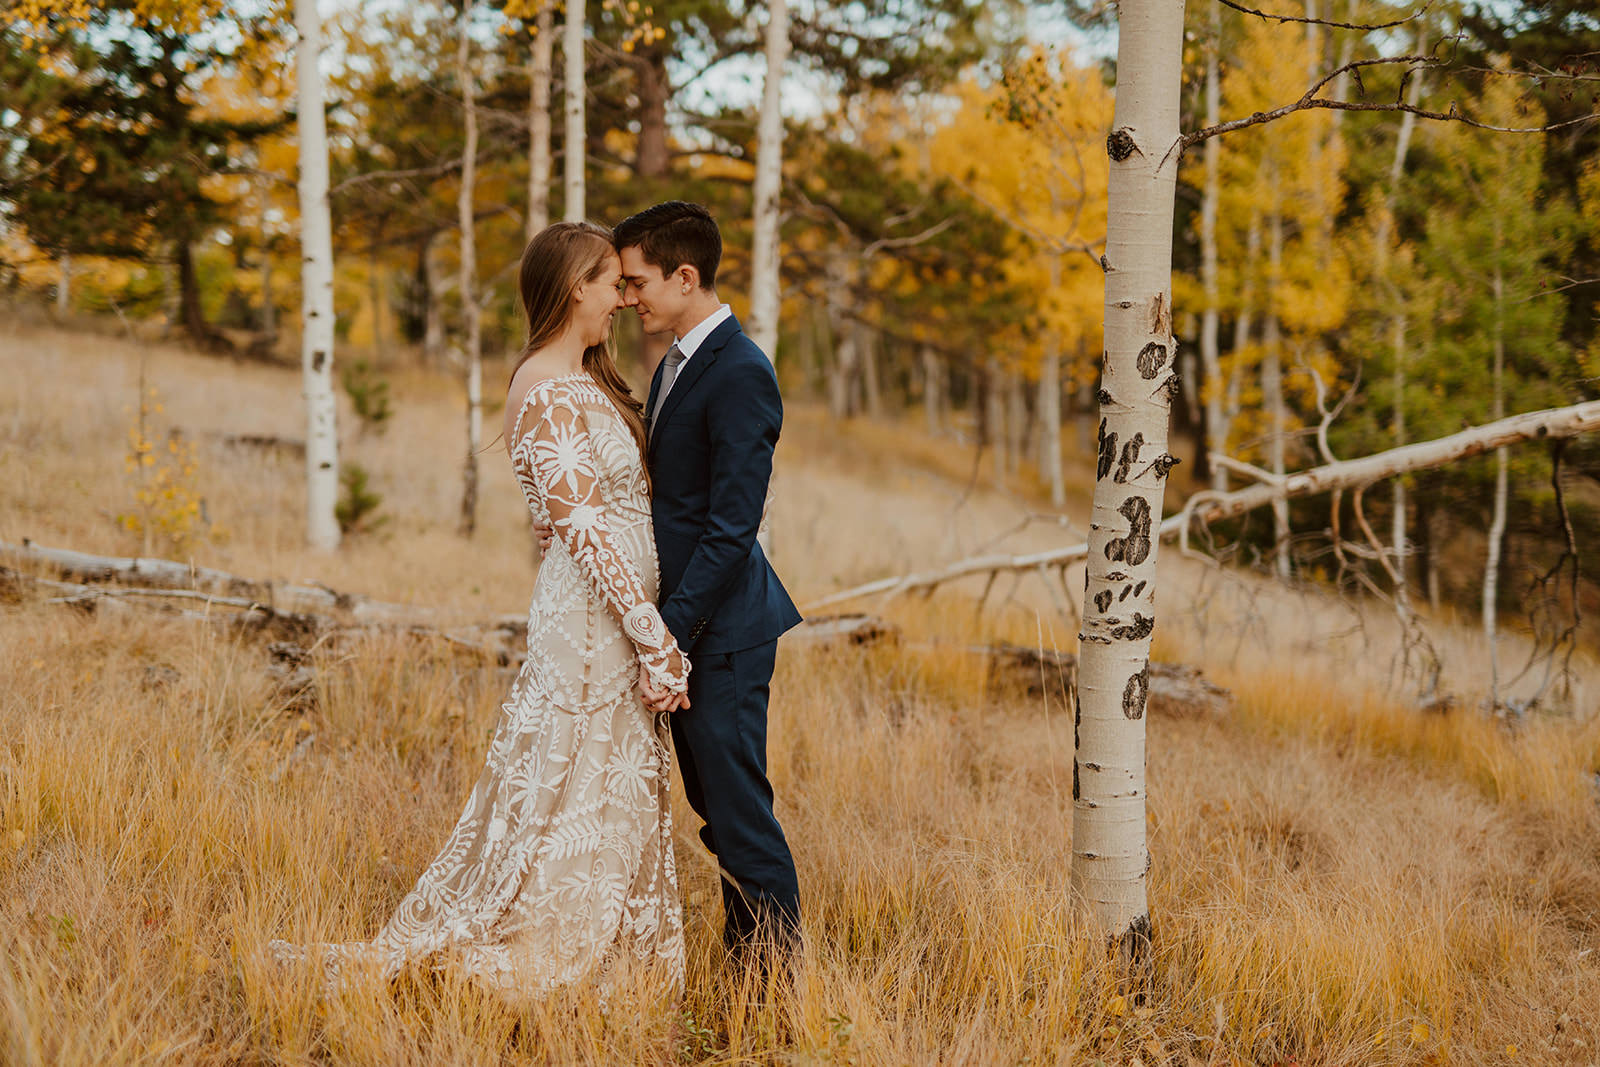 A couple embracing during their fall elopement in Colorado surrounded by golden aspen trees.